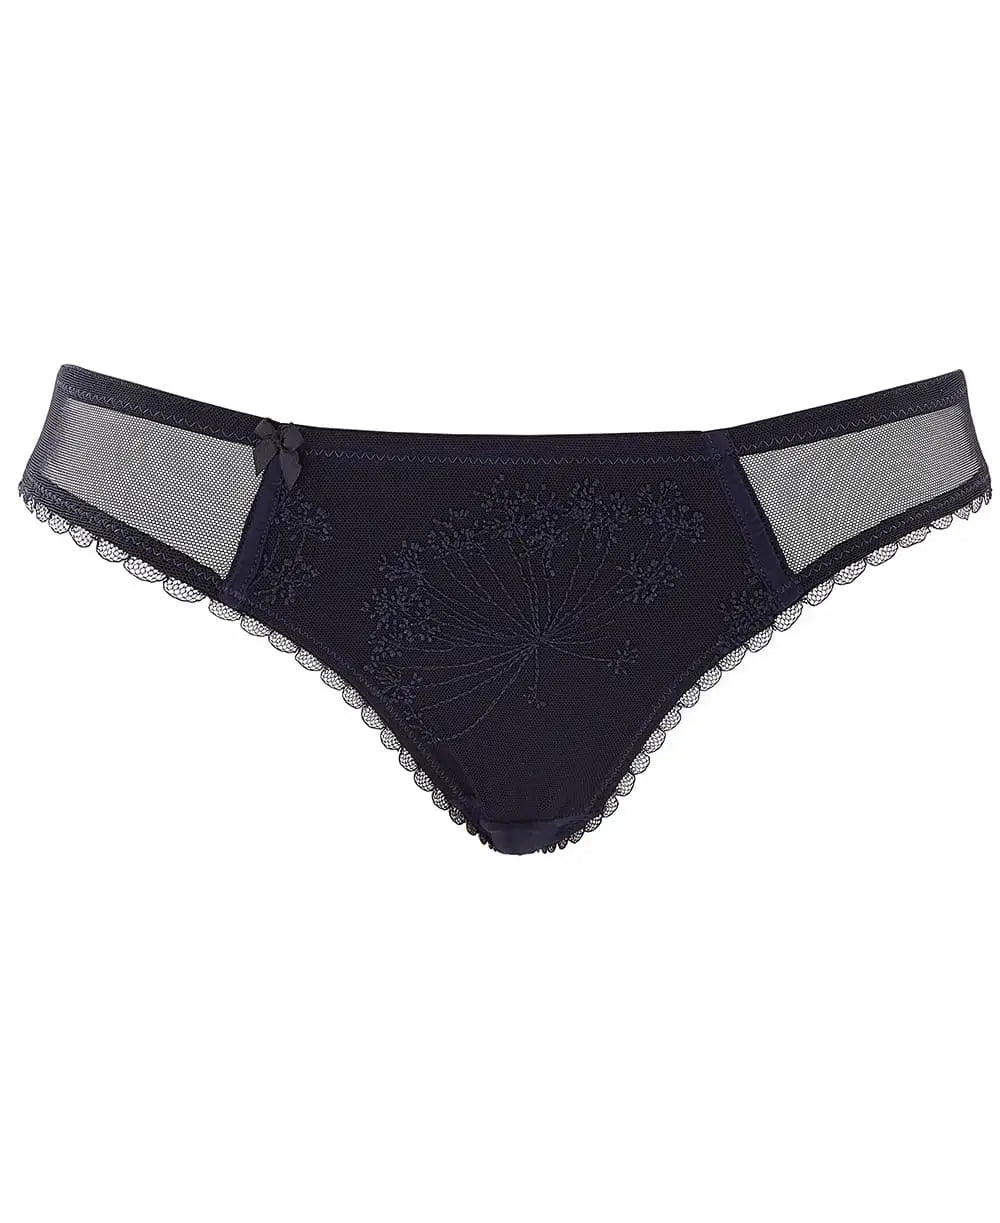 Maternity brief Louise navy